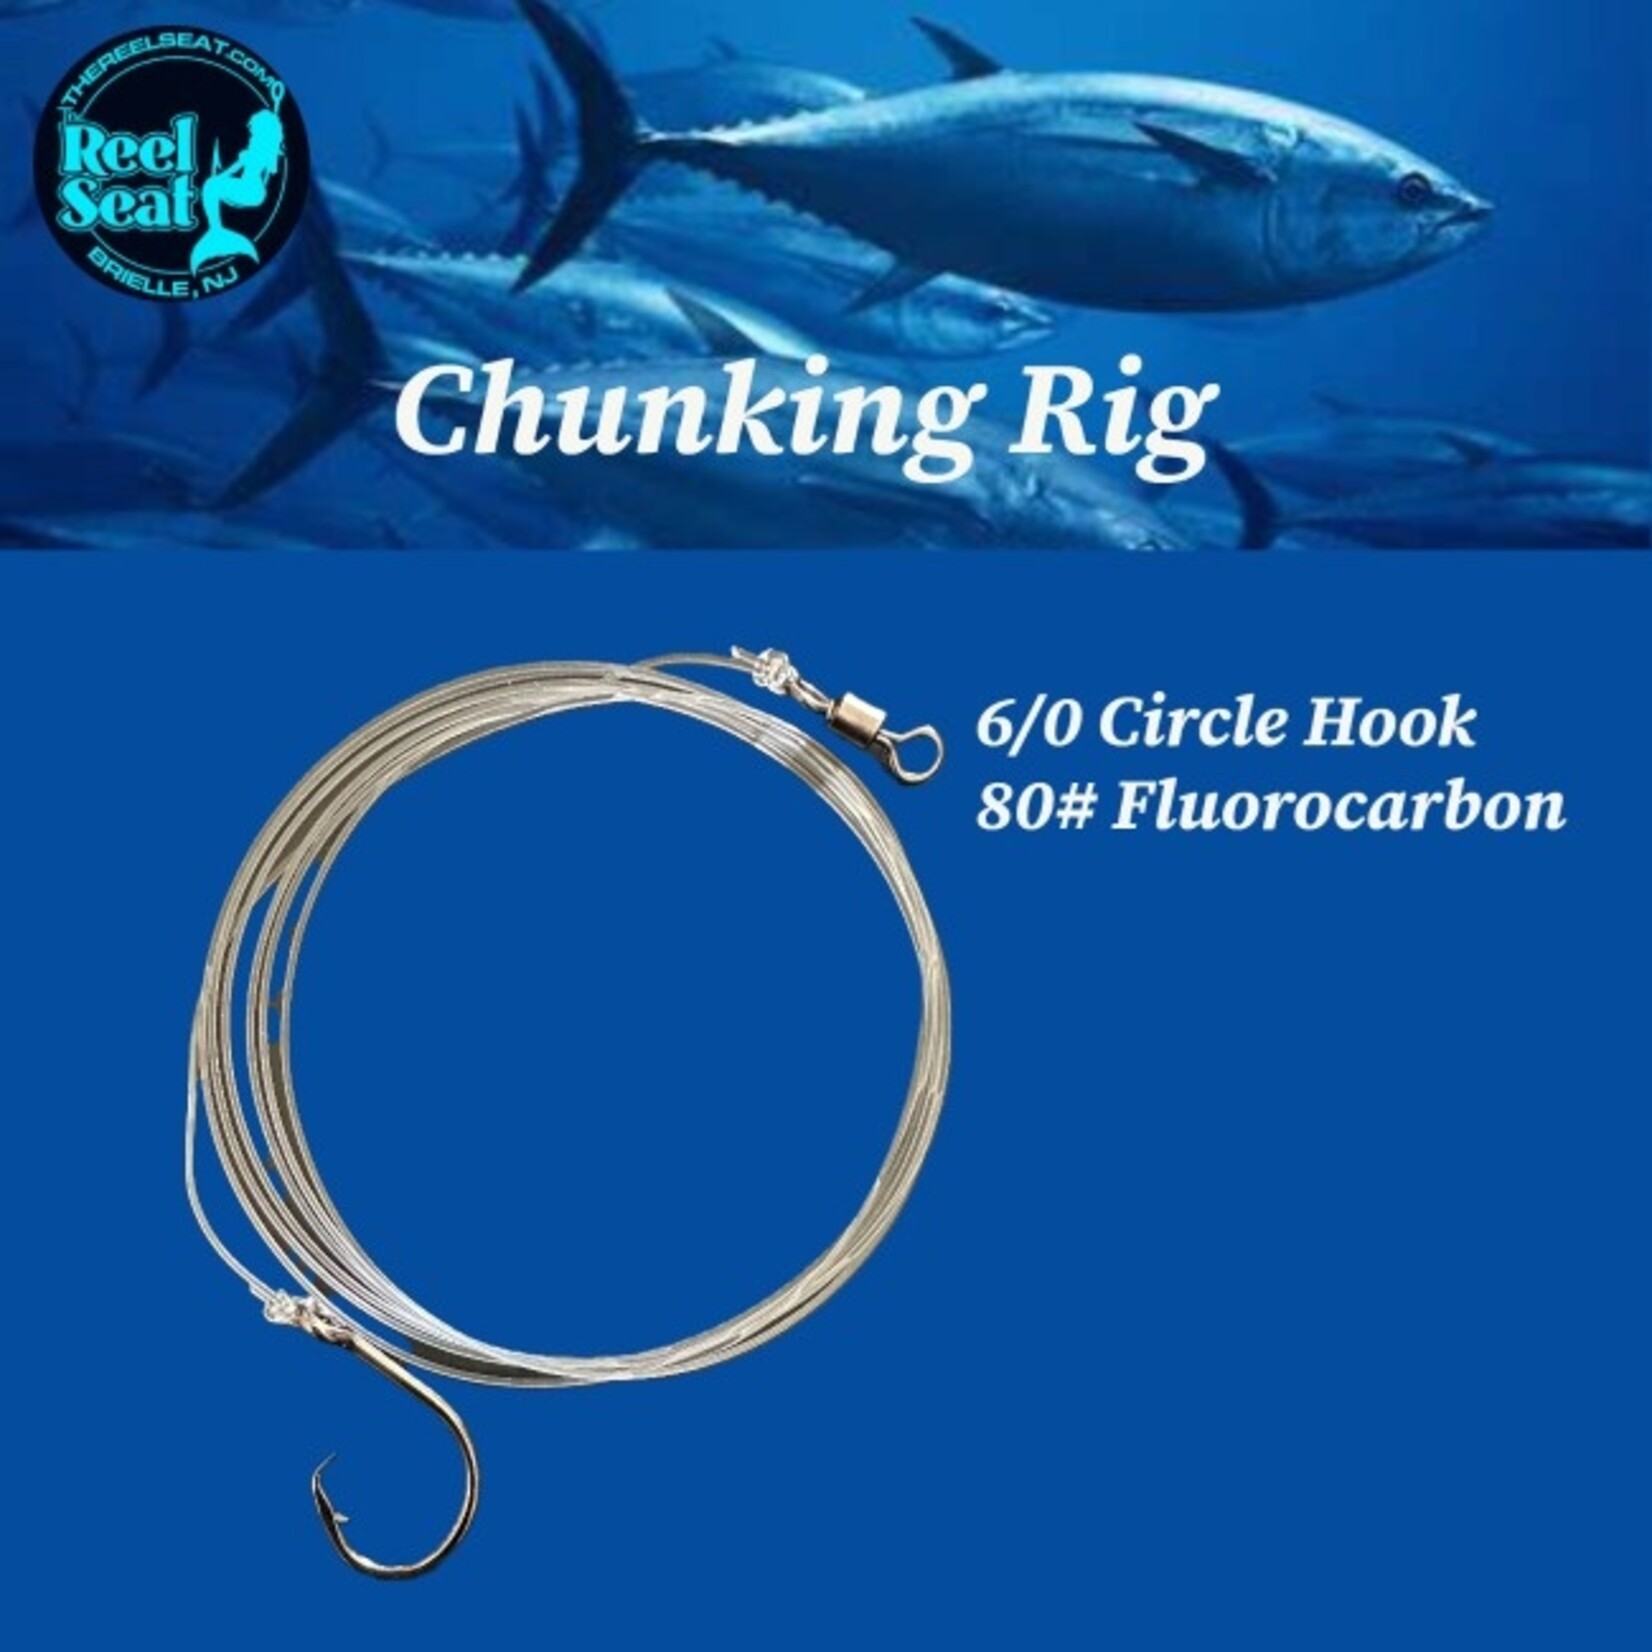 The Reel Seat RS Chunking Rig 6/0 circle hook 80lb Fluorocarbon